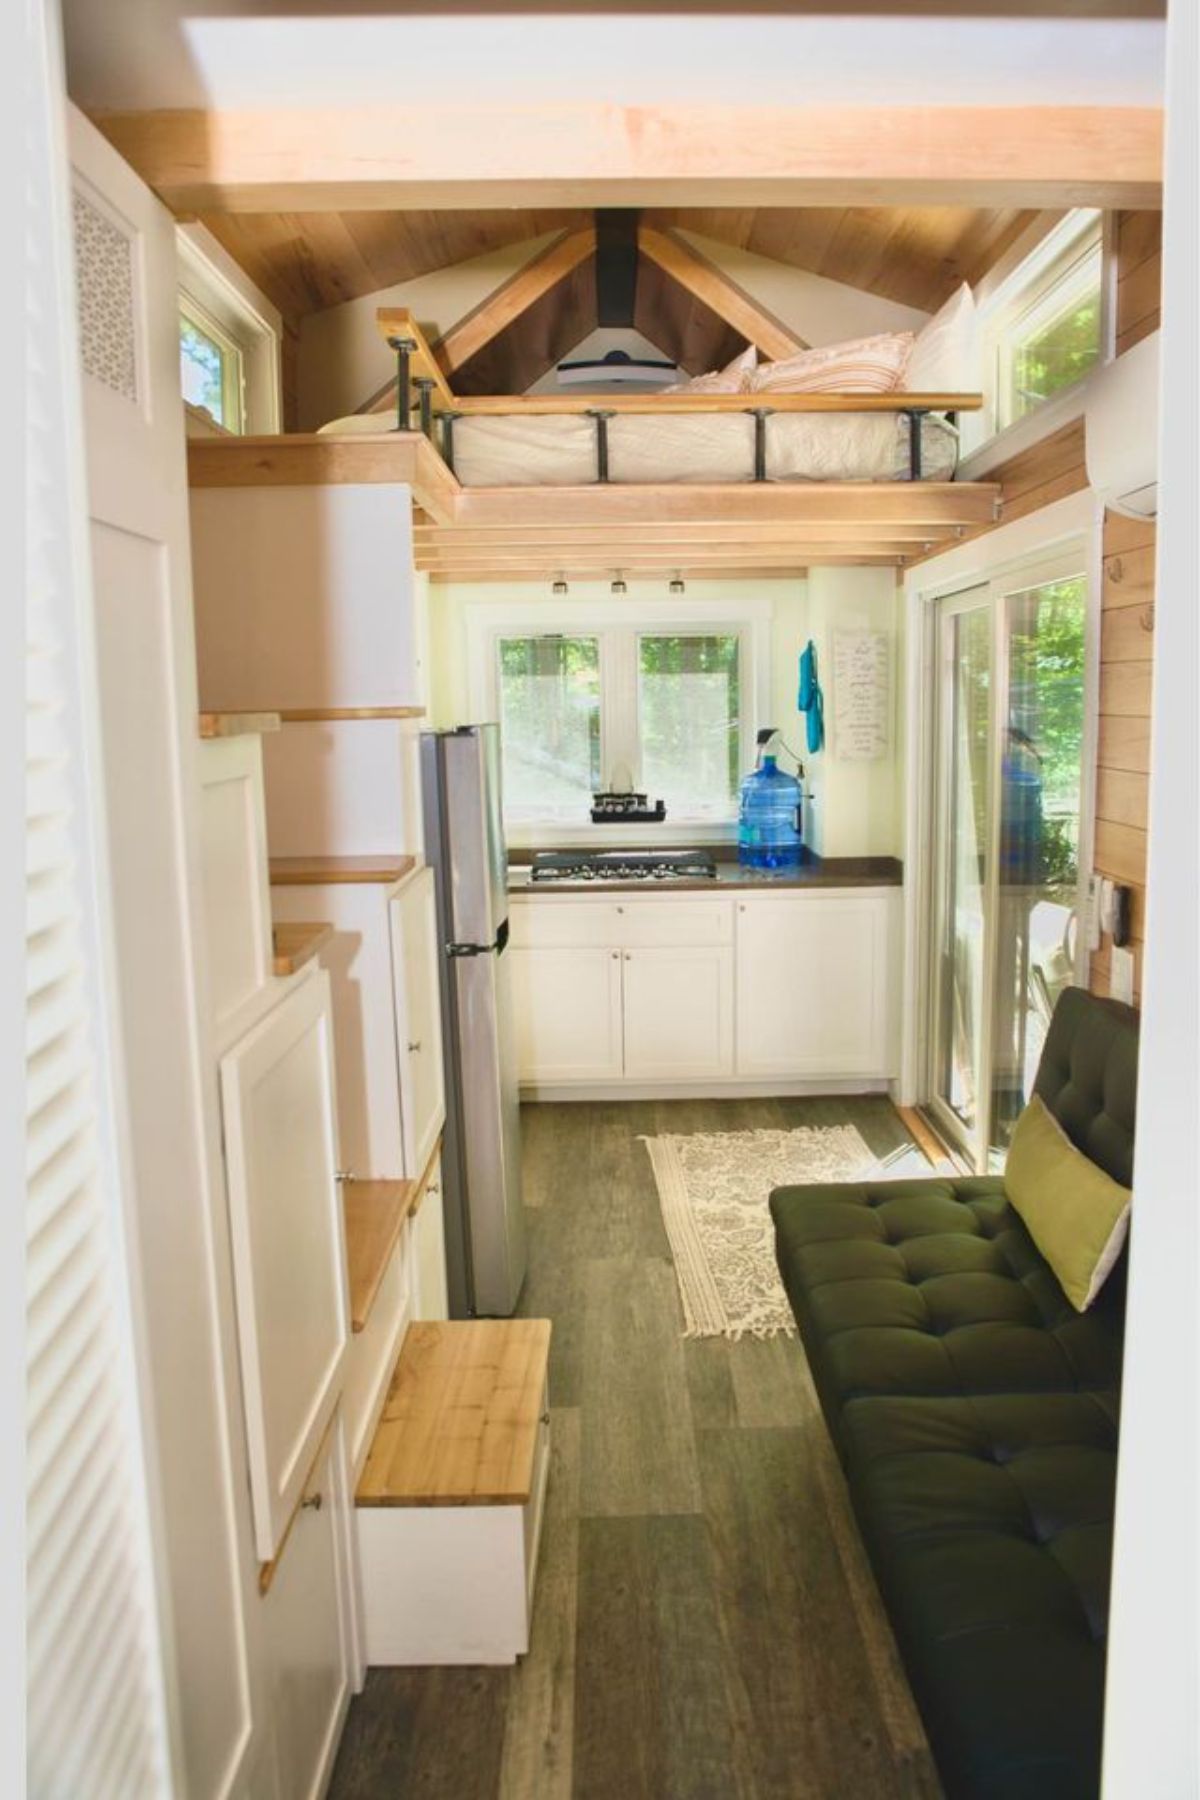 Classic interiors of Two Bedroom High End Tiny Home